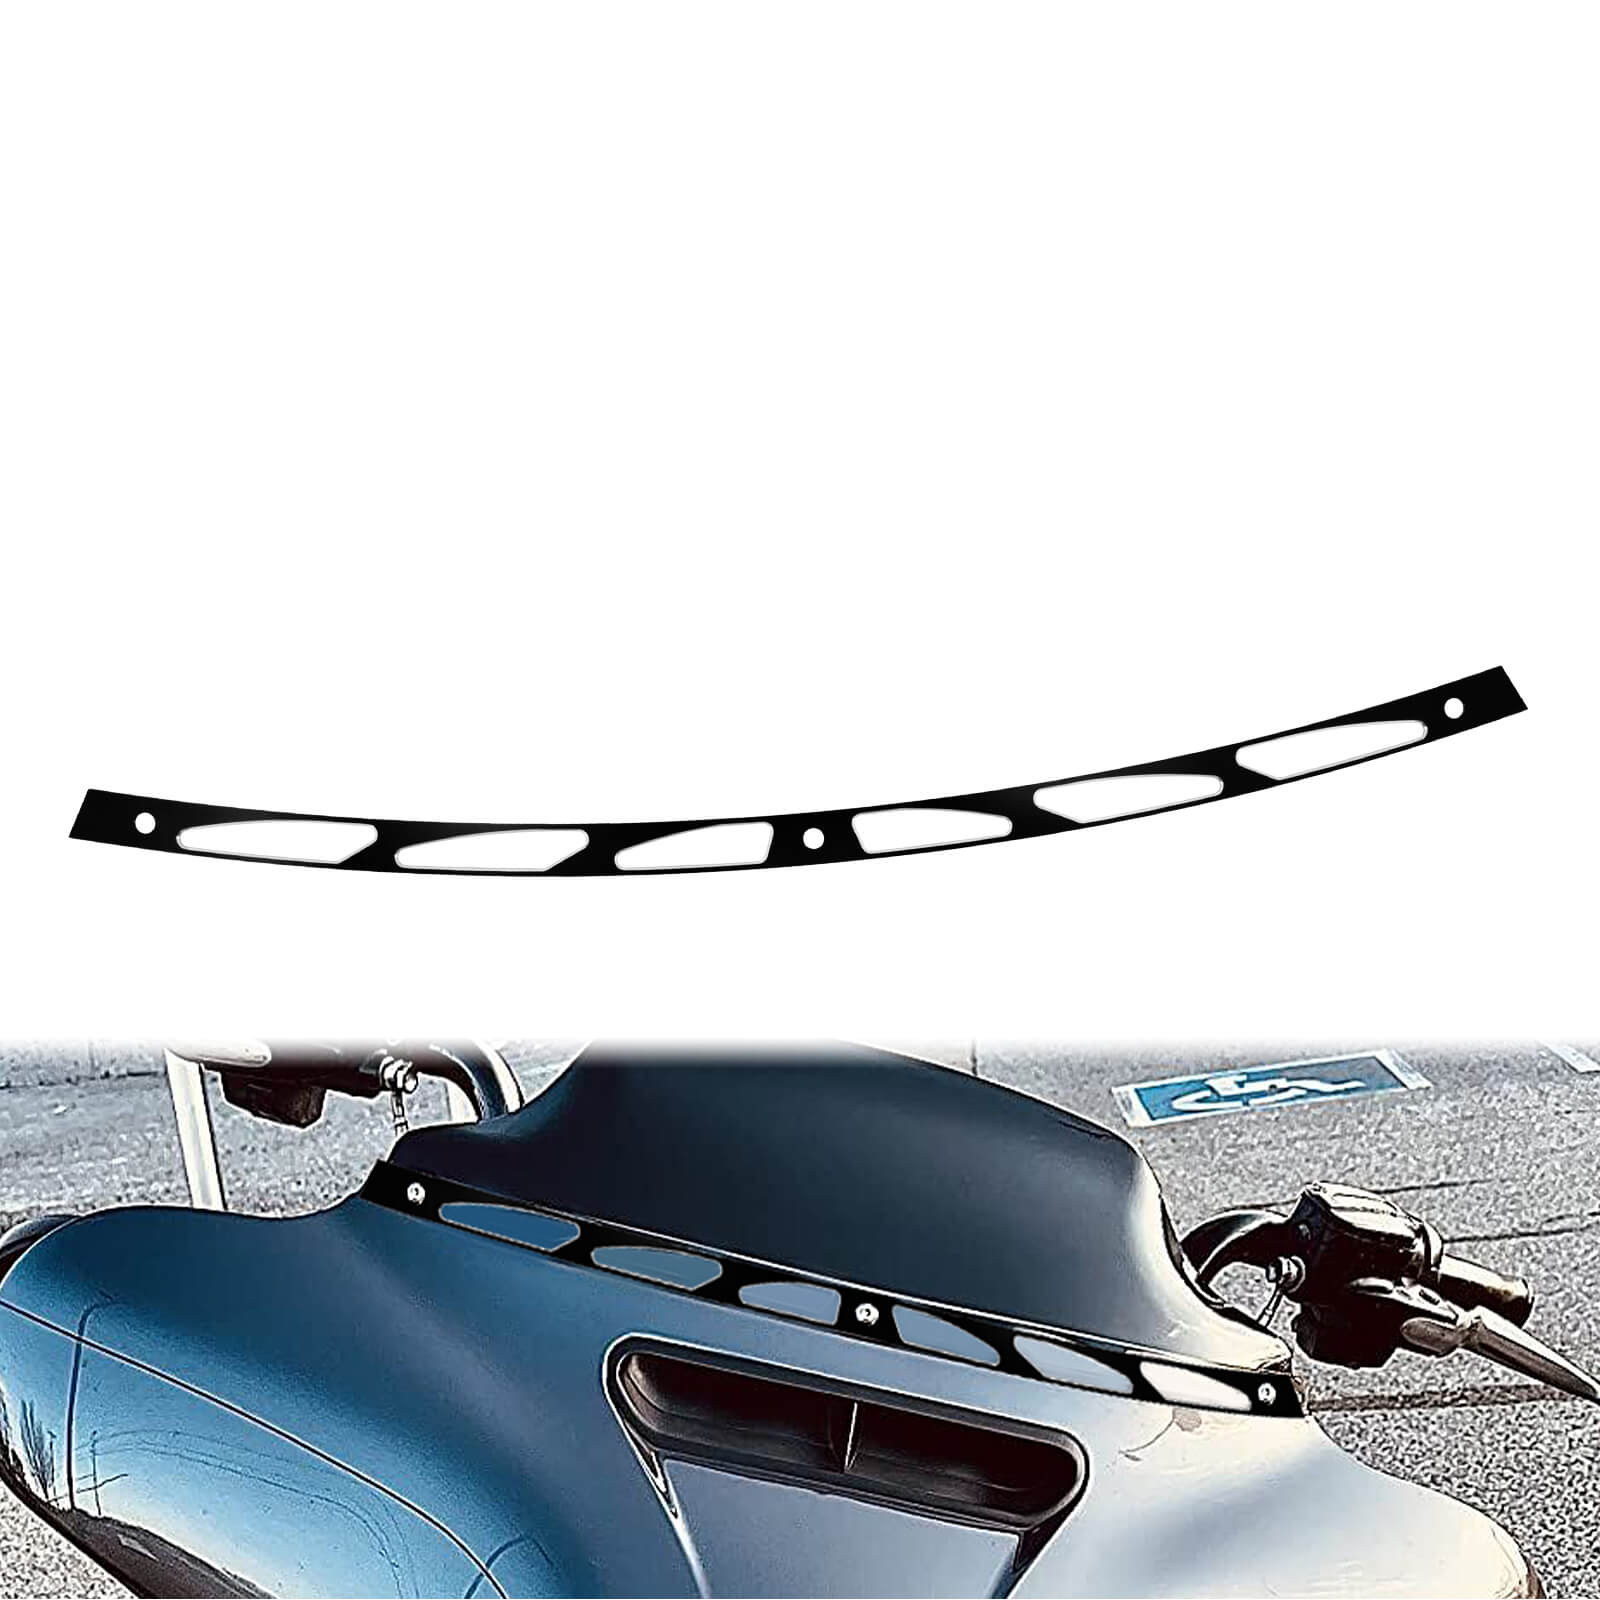 WI001101-mactions-hollow-fairing-windshield-trim-for-harley